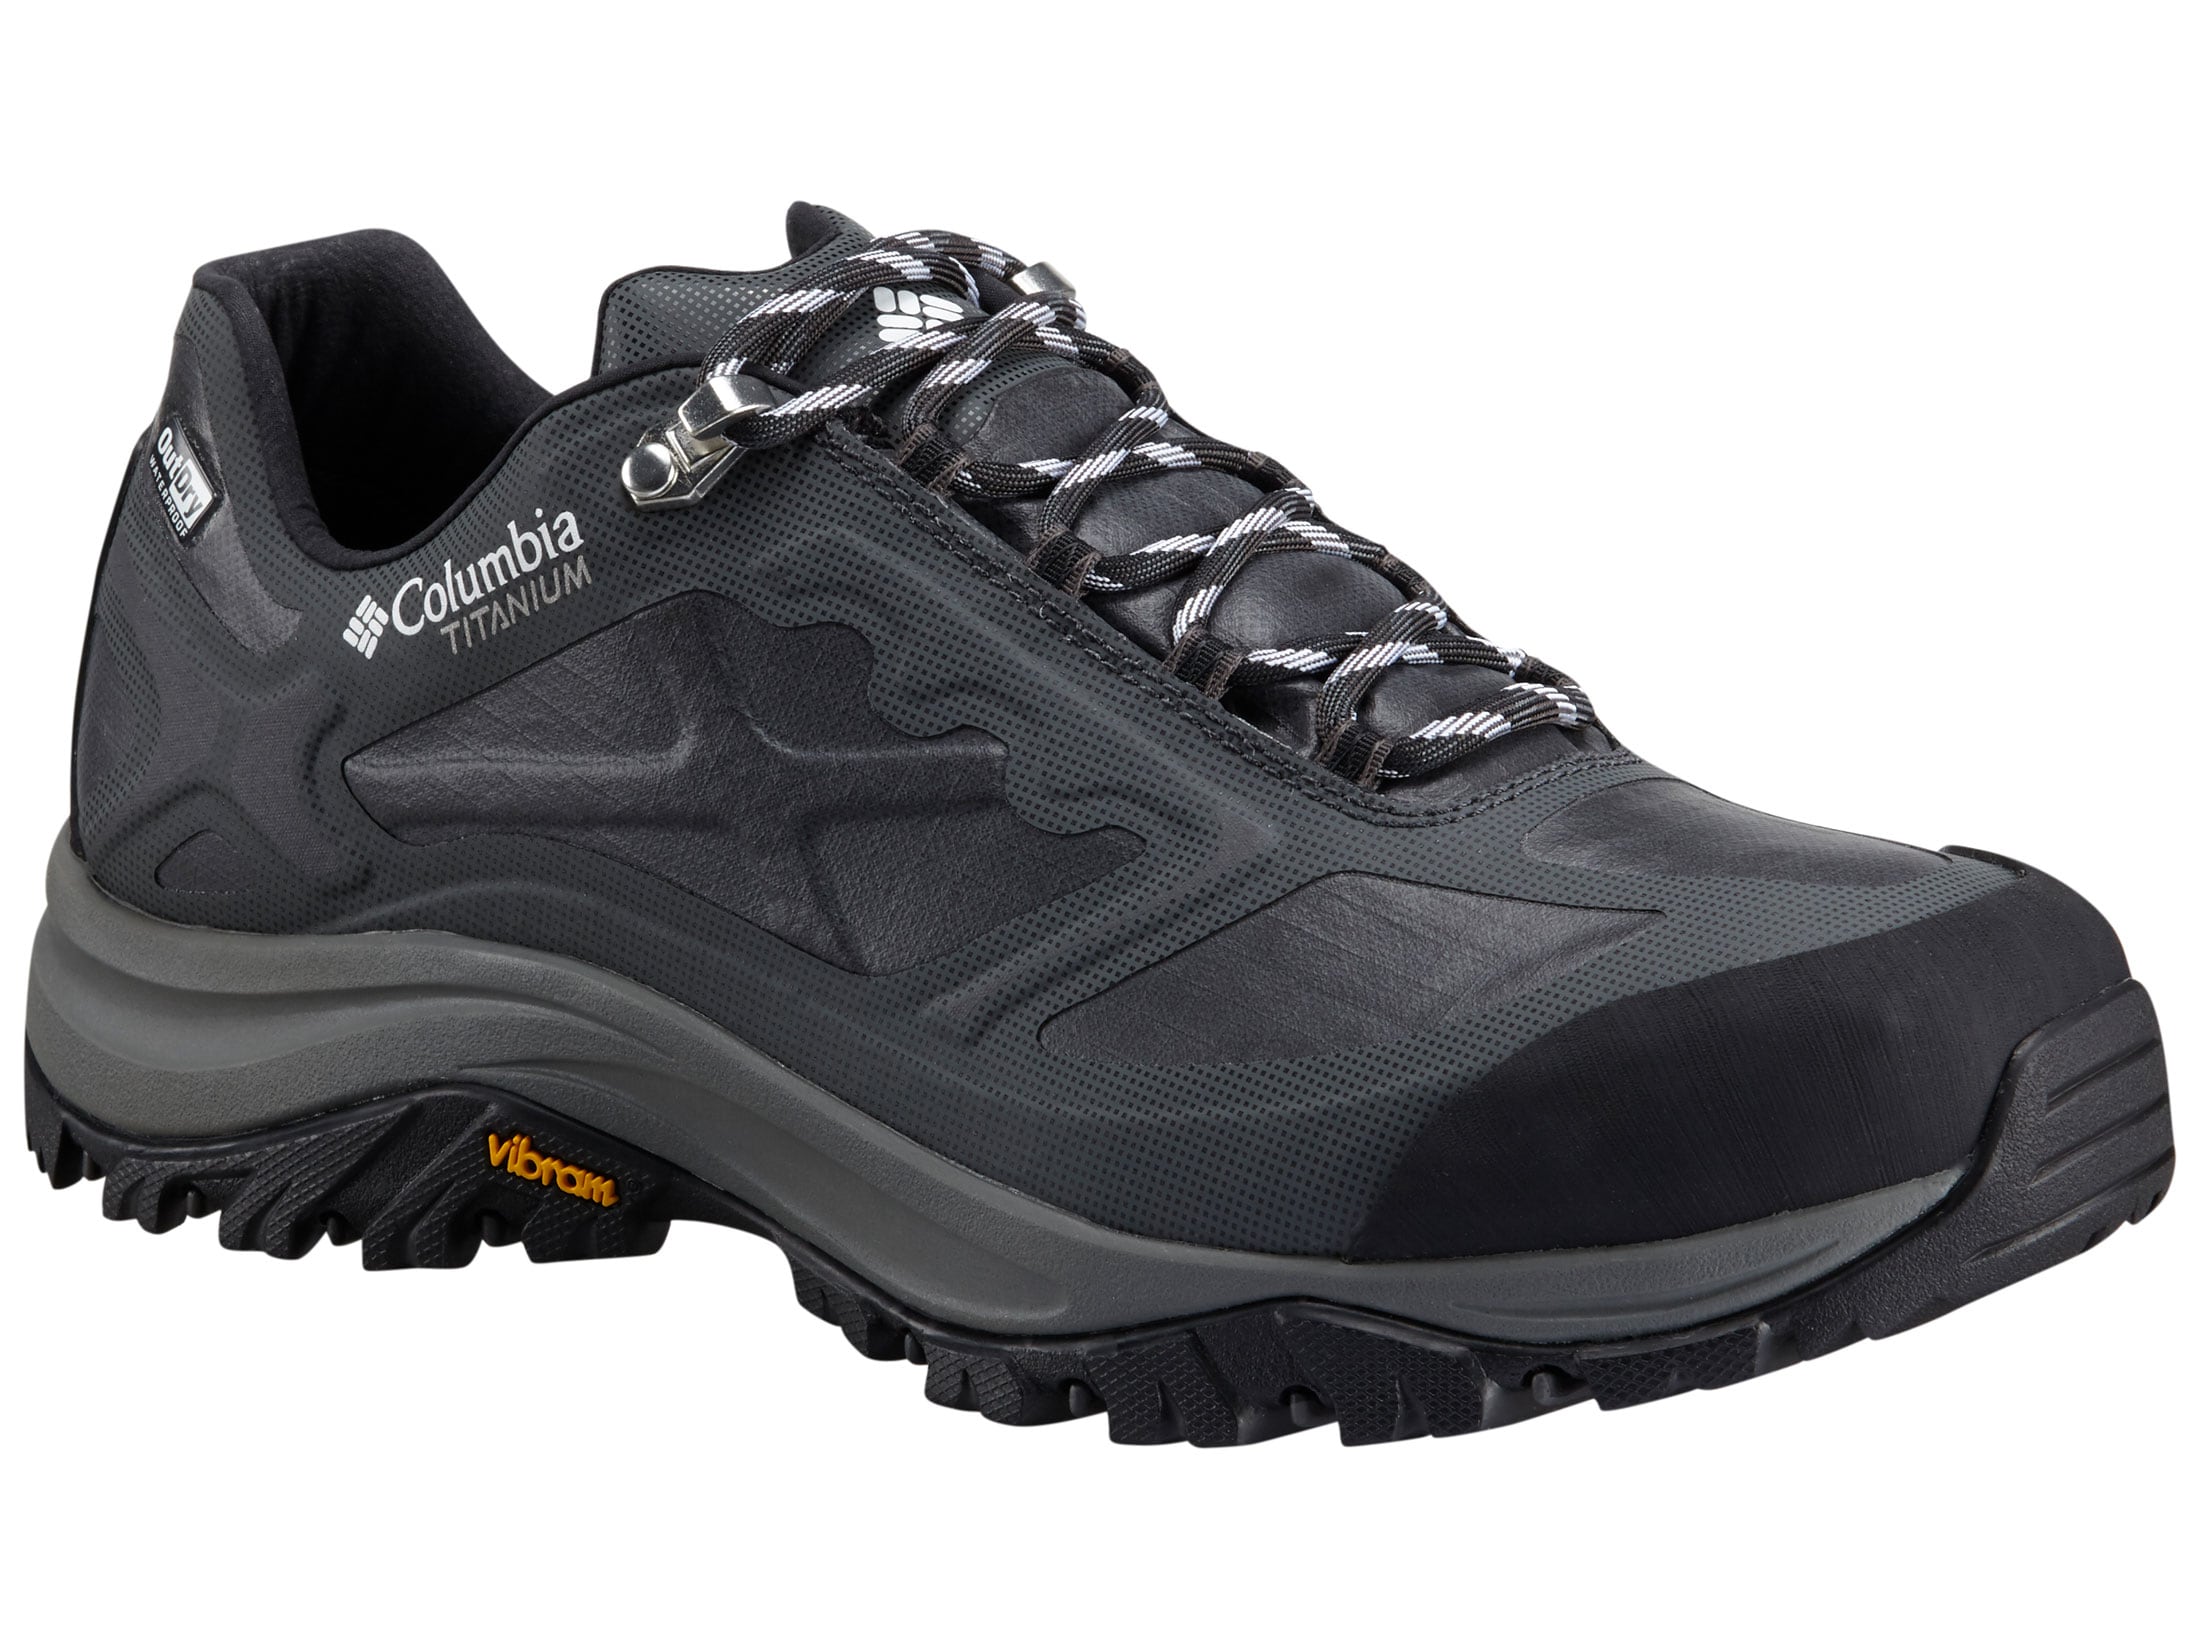 Columbia Terrebonne Outdry Extreme Low 4 Waterproof Hiking Shoes